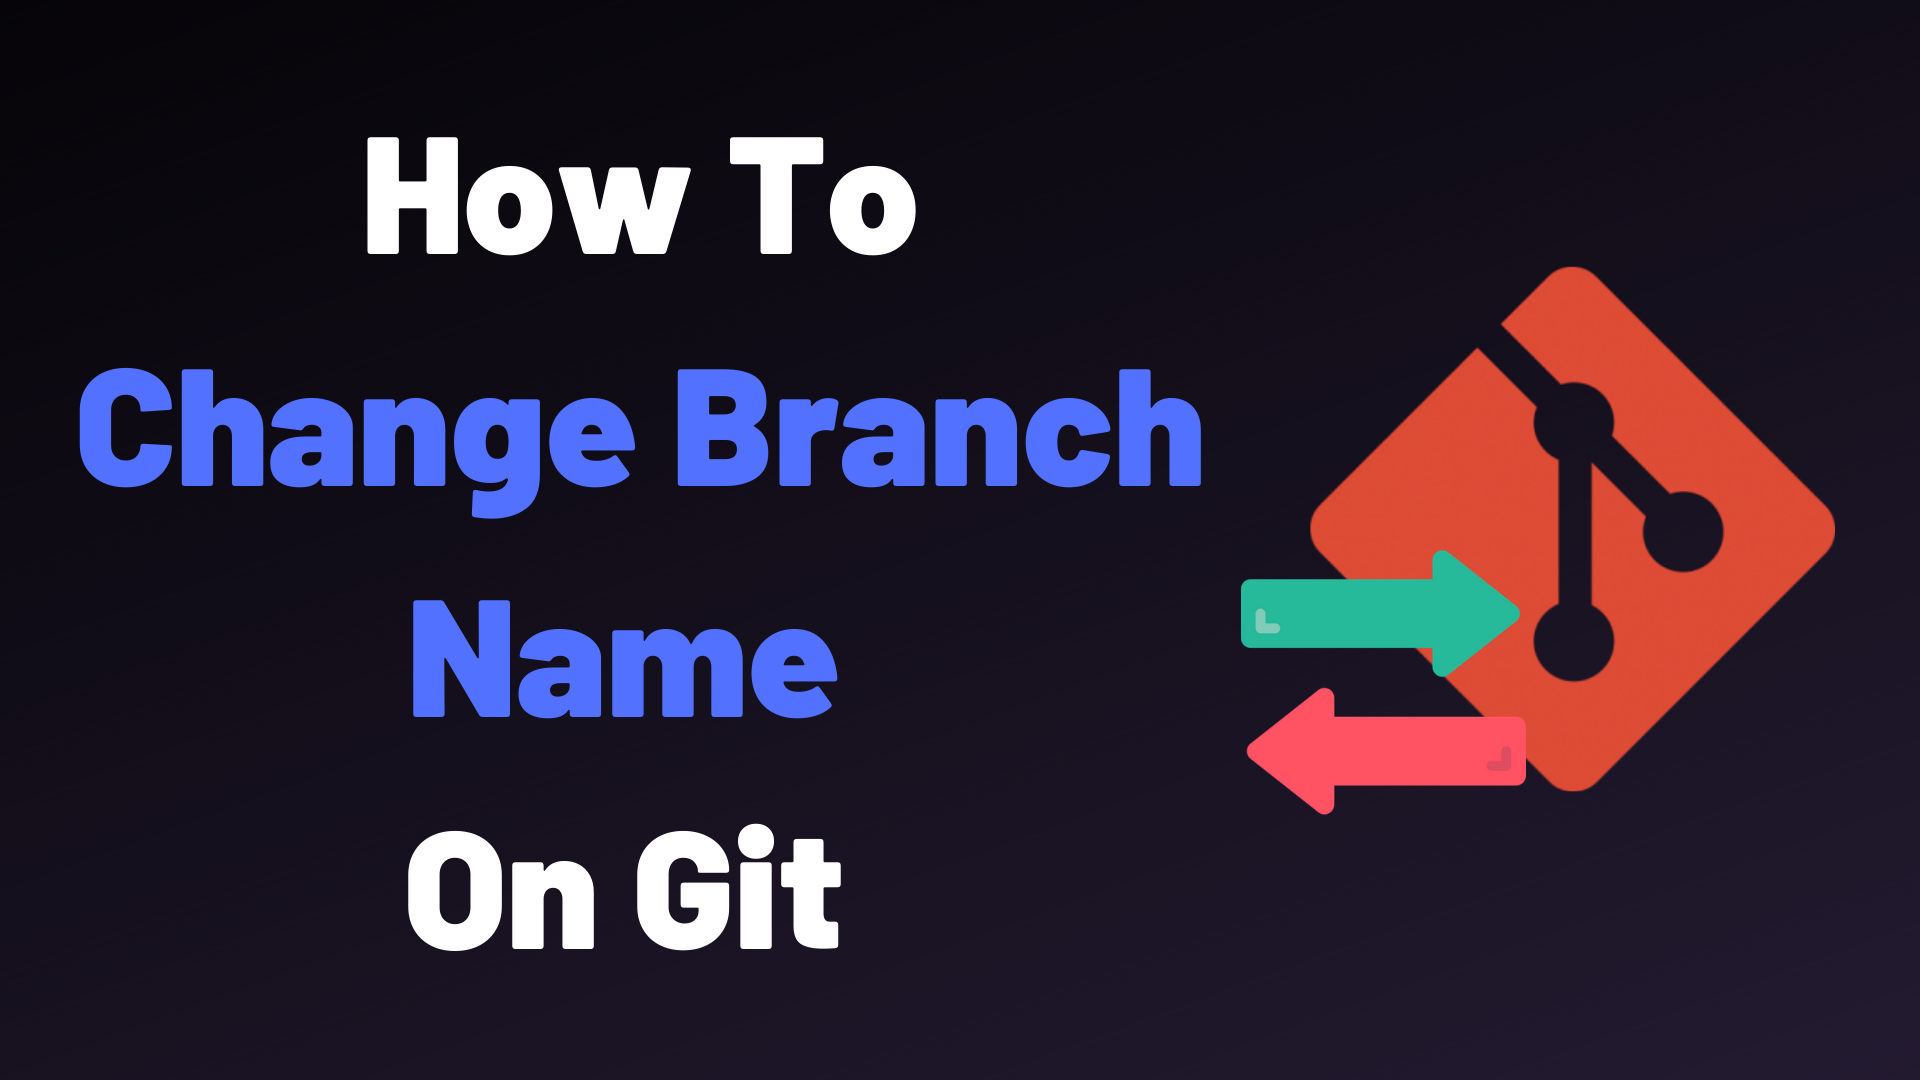 How To Change Branch Name on Git